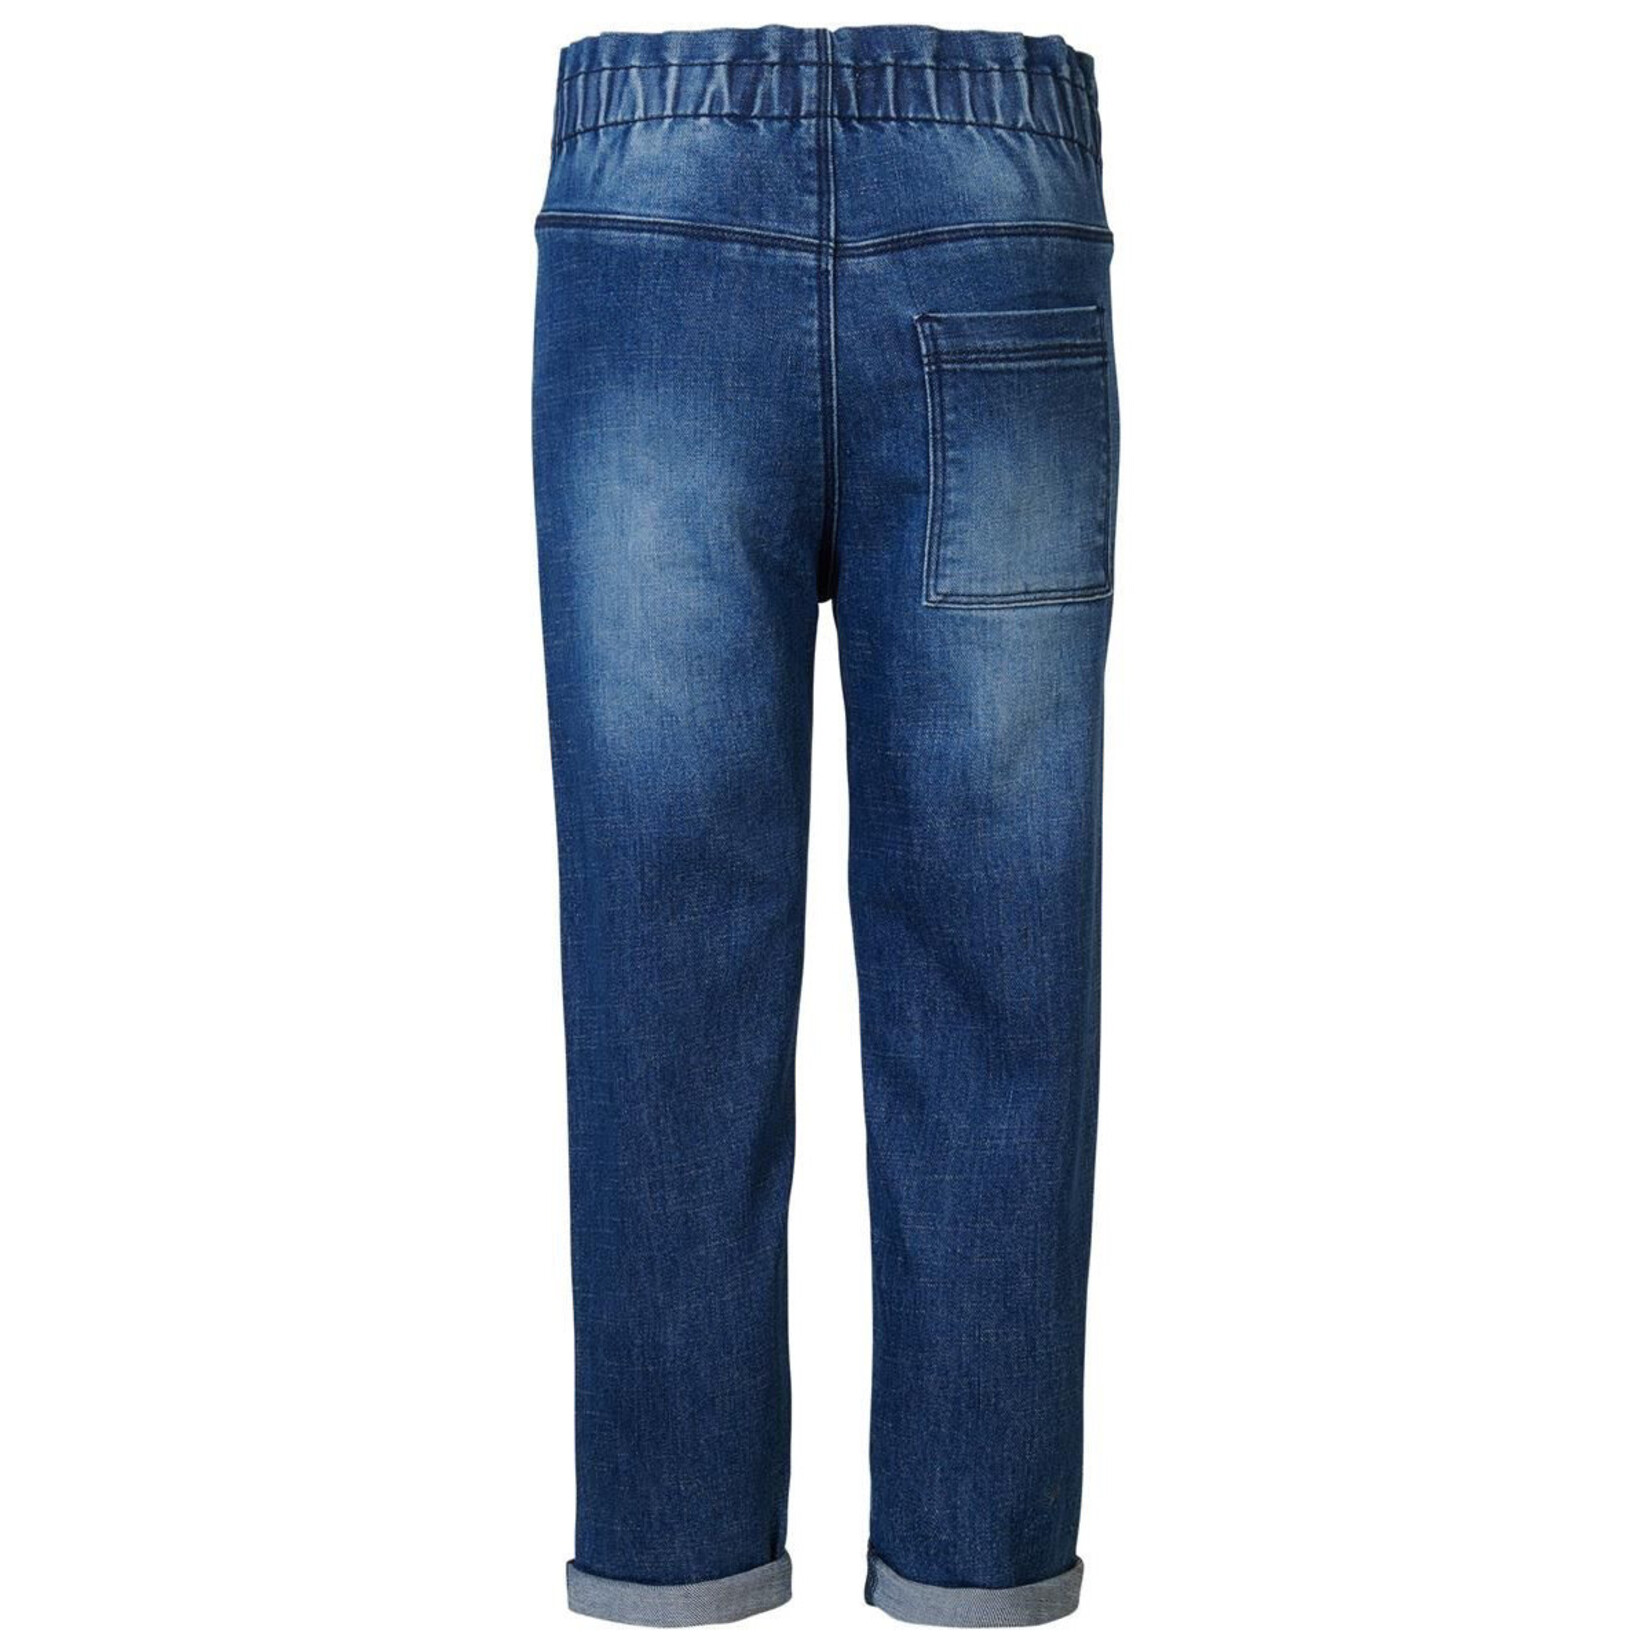 Noppies Noppies - Altoona Relaxed Fit Denim Pants